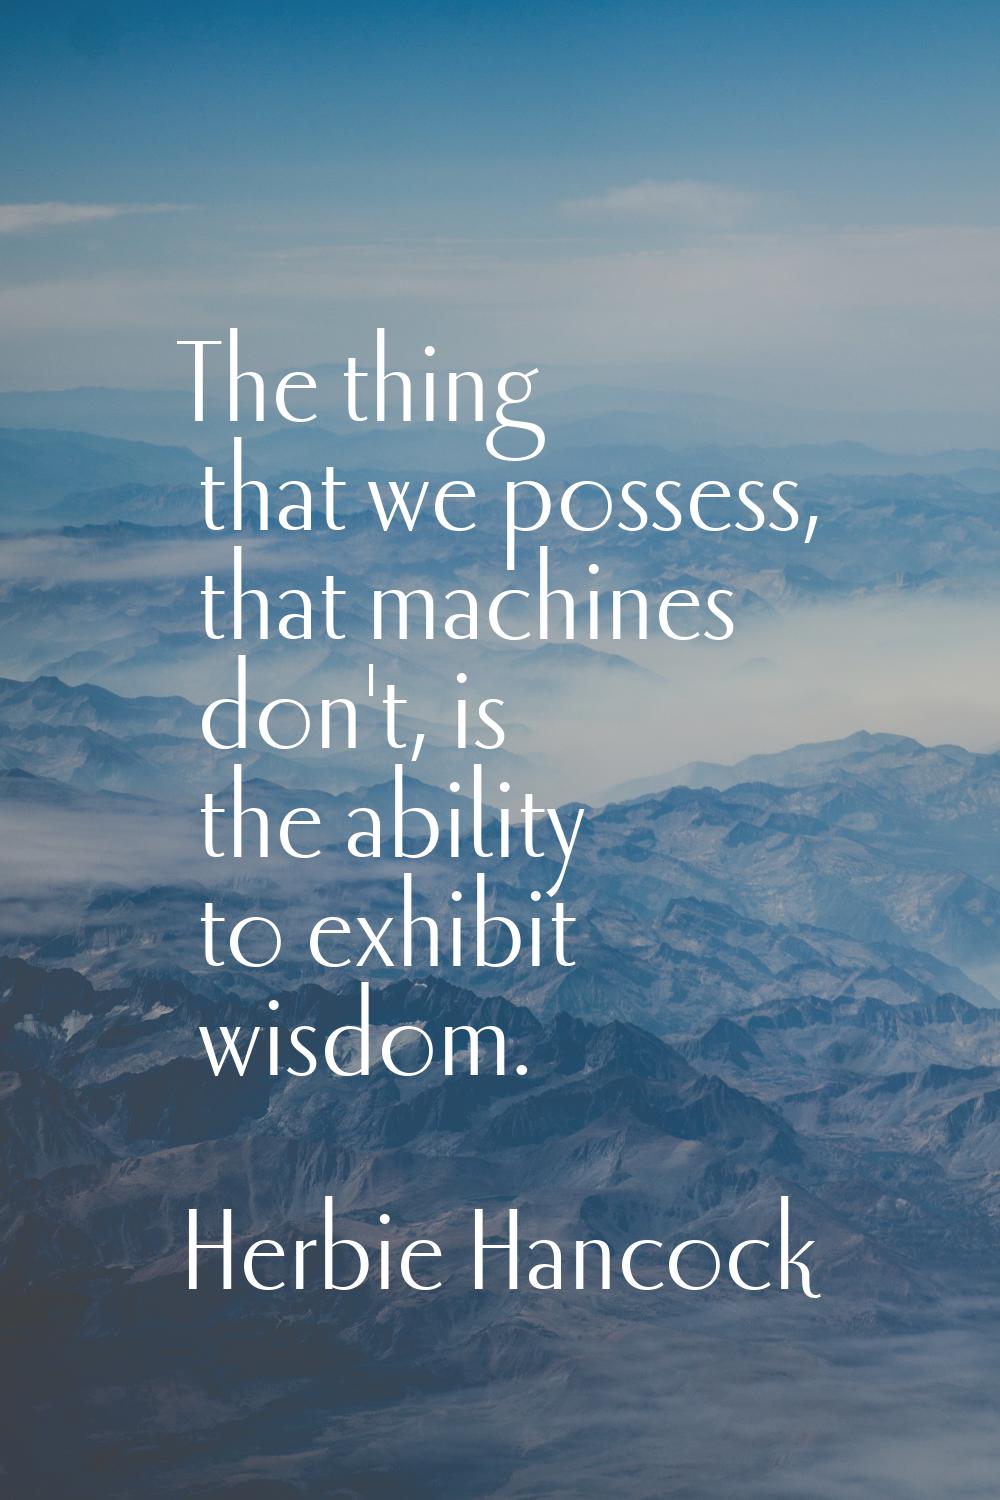 The thing that we possess, that machines don't, is the ability to exhibit wisdom.